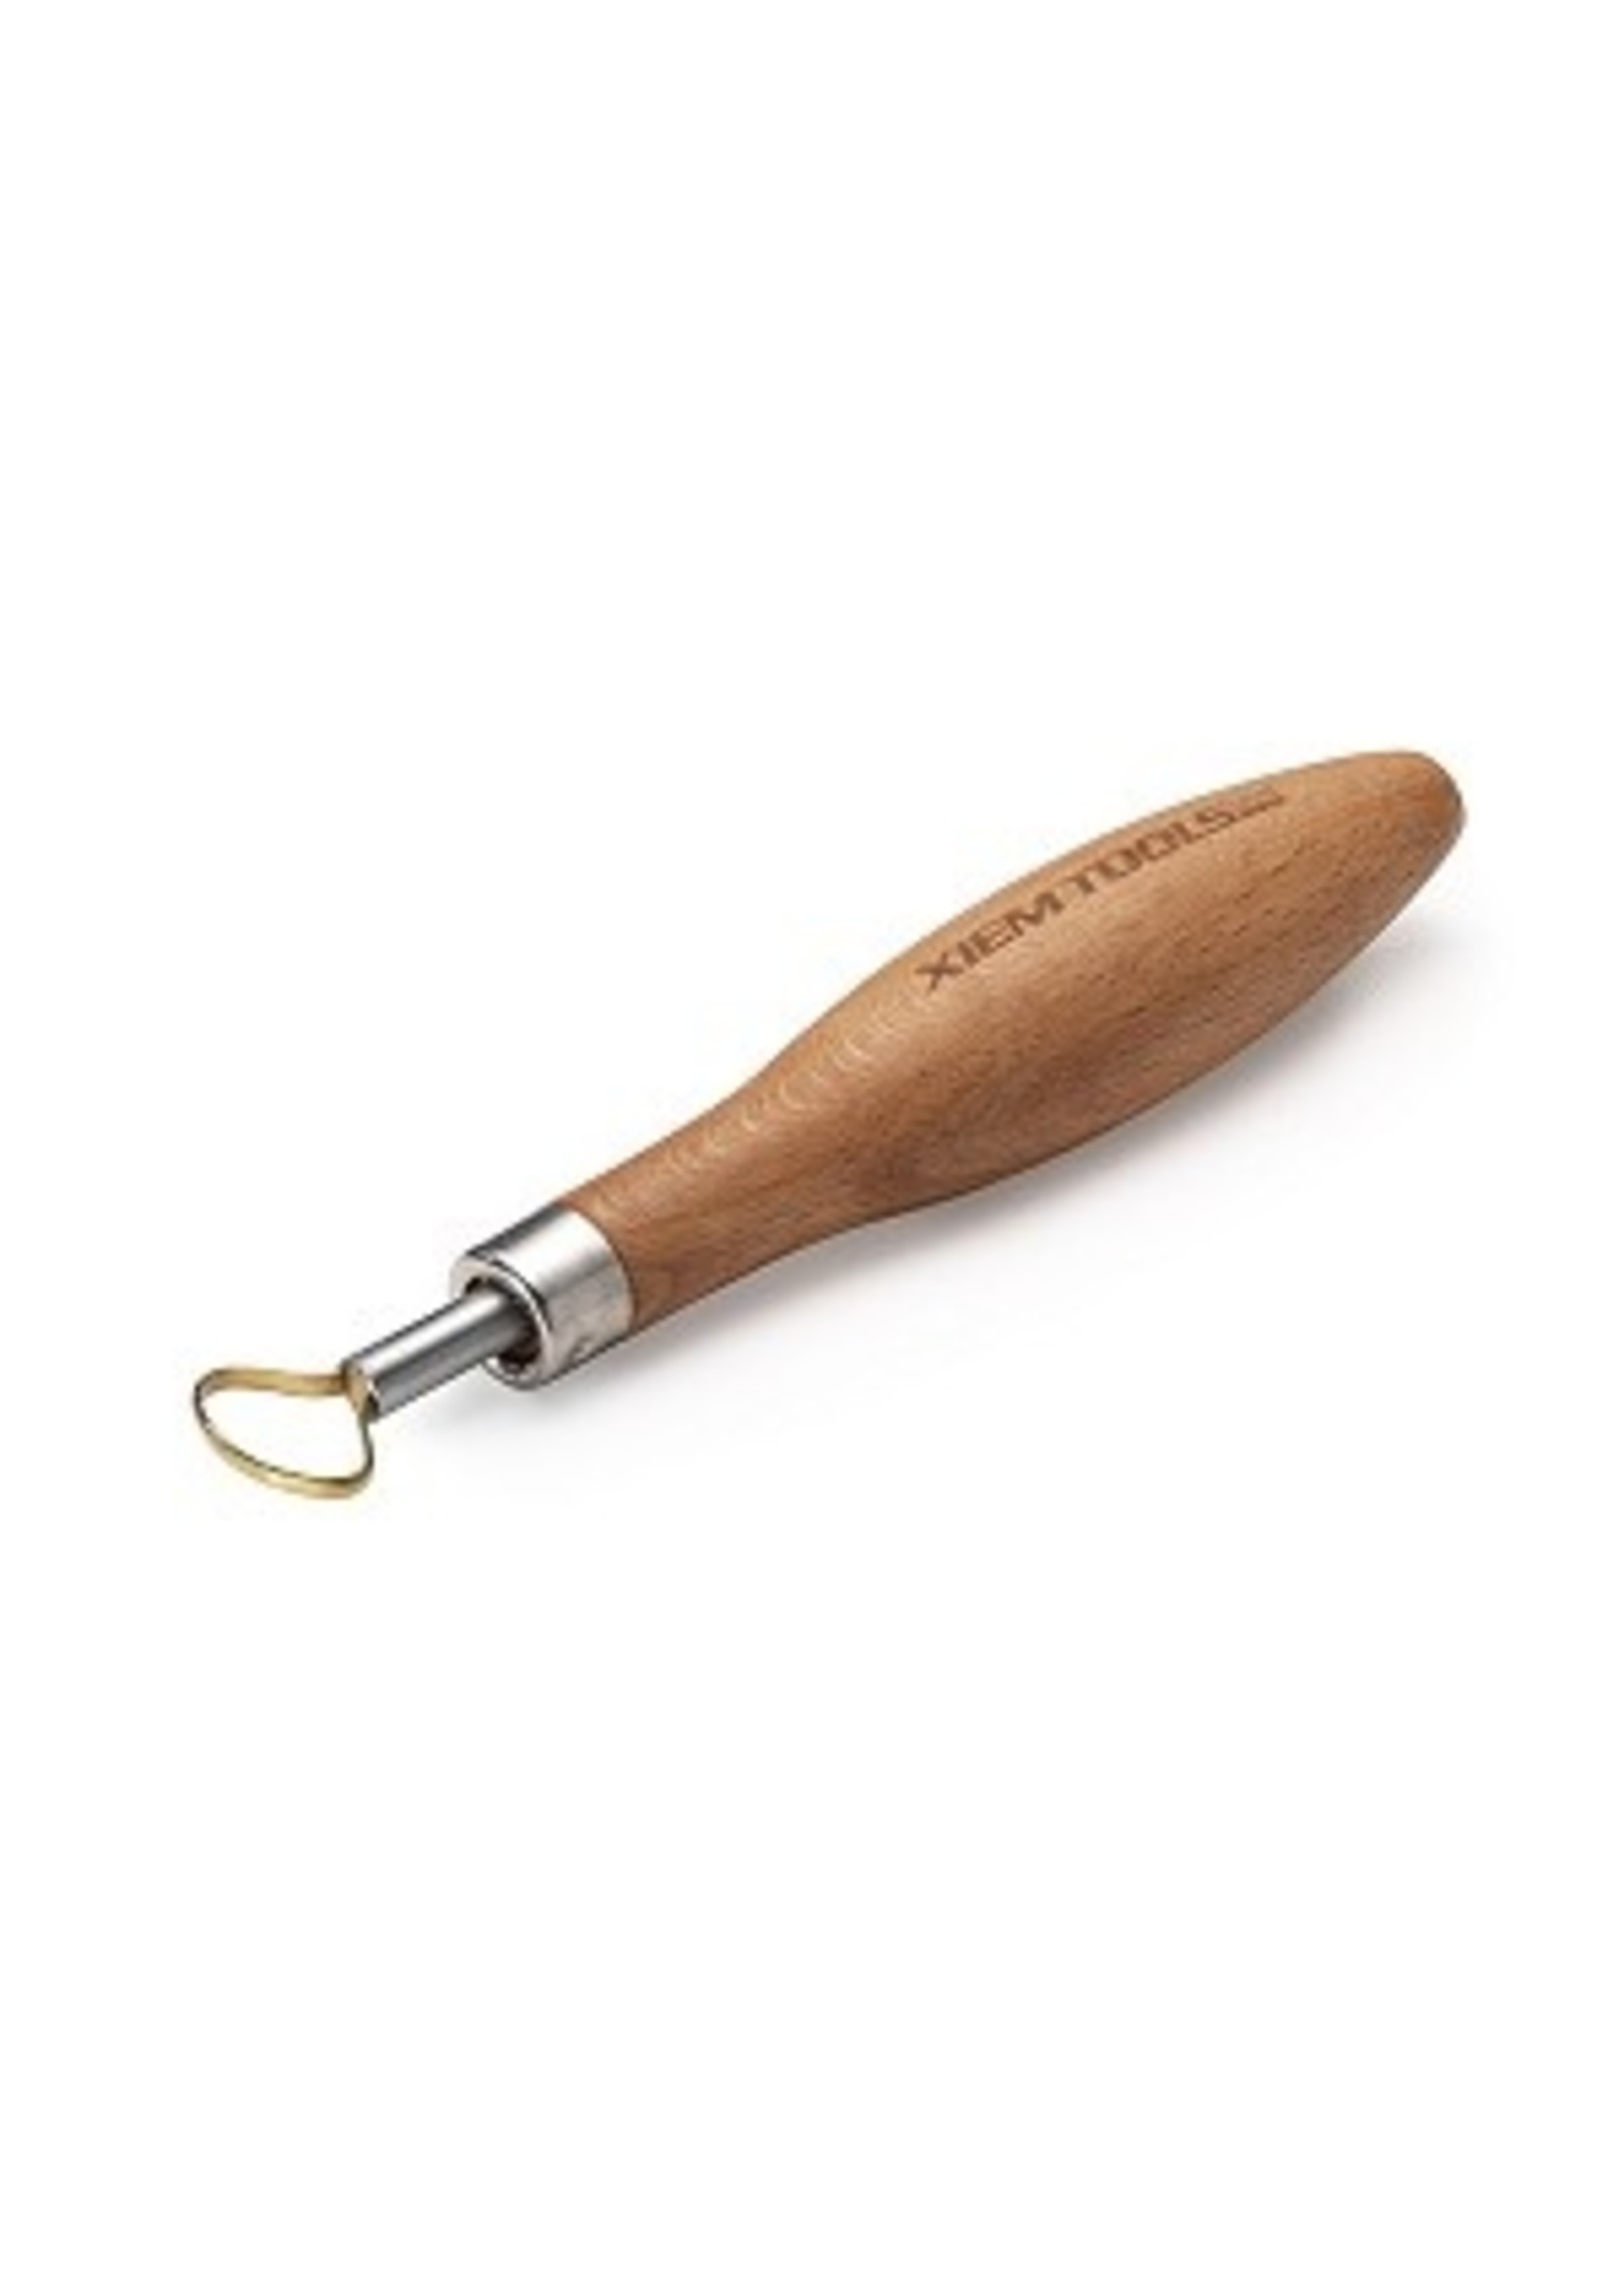 Small Oval Pro Trimming Tool TFT09 - The Potter's Shop